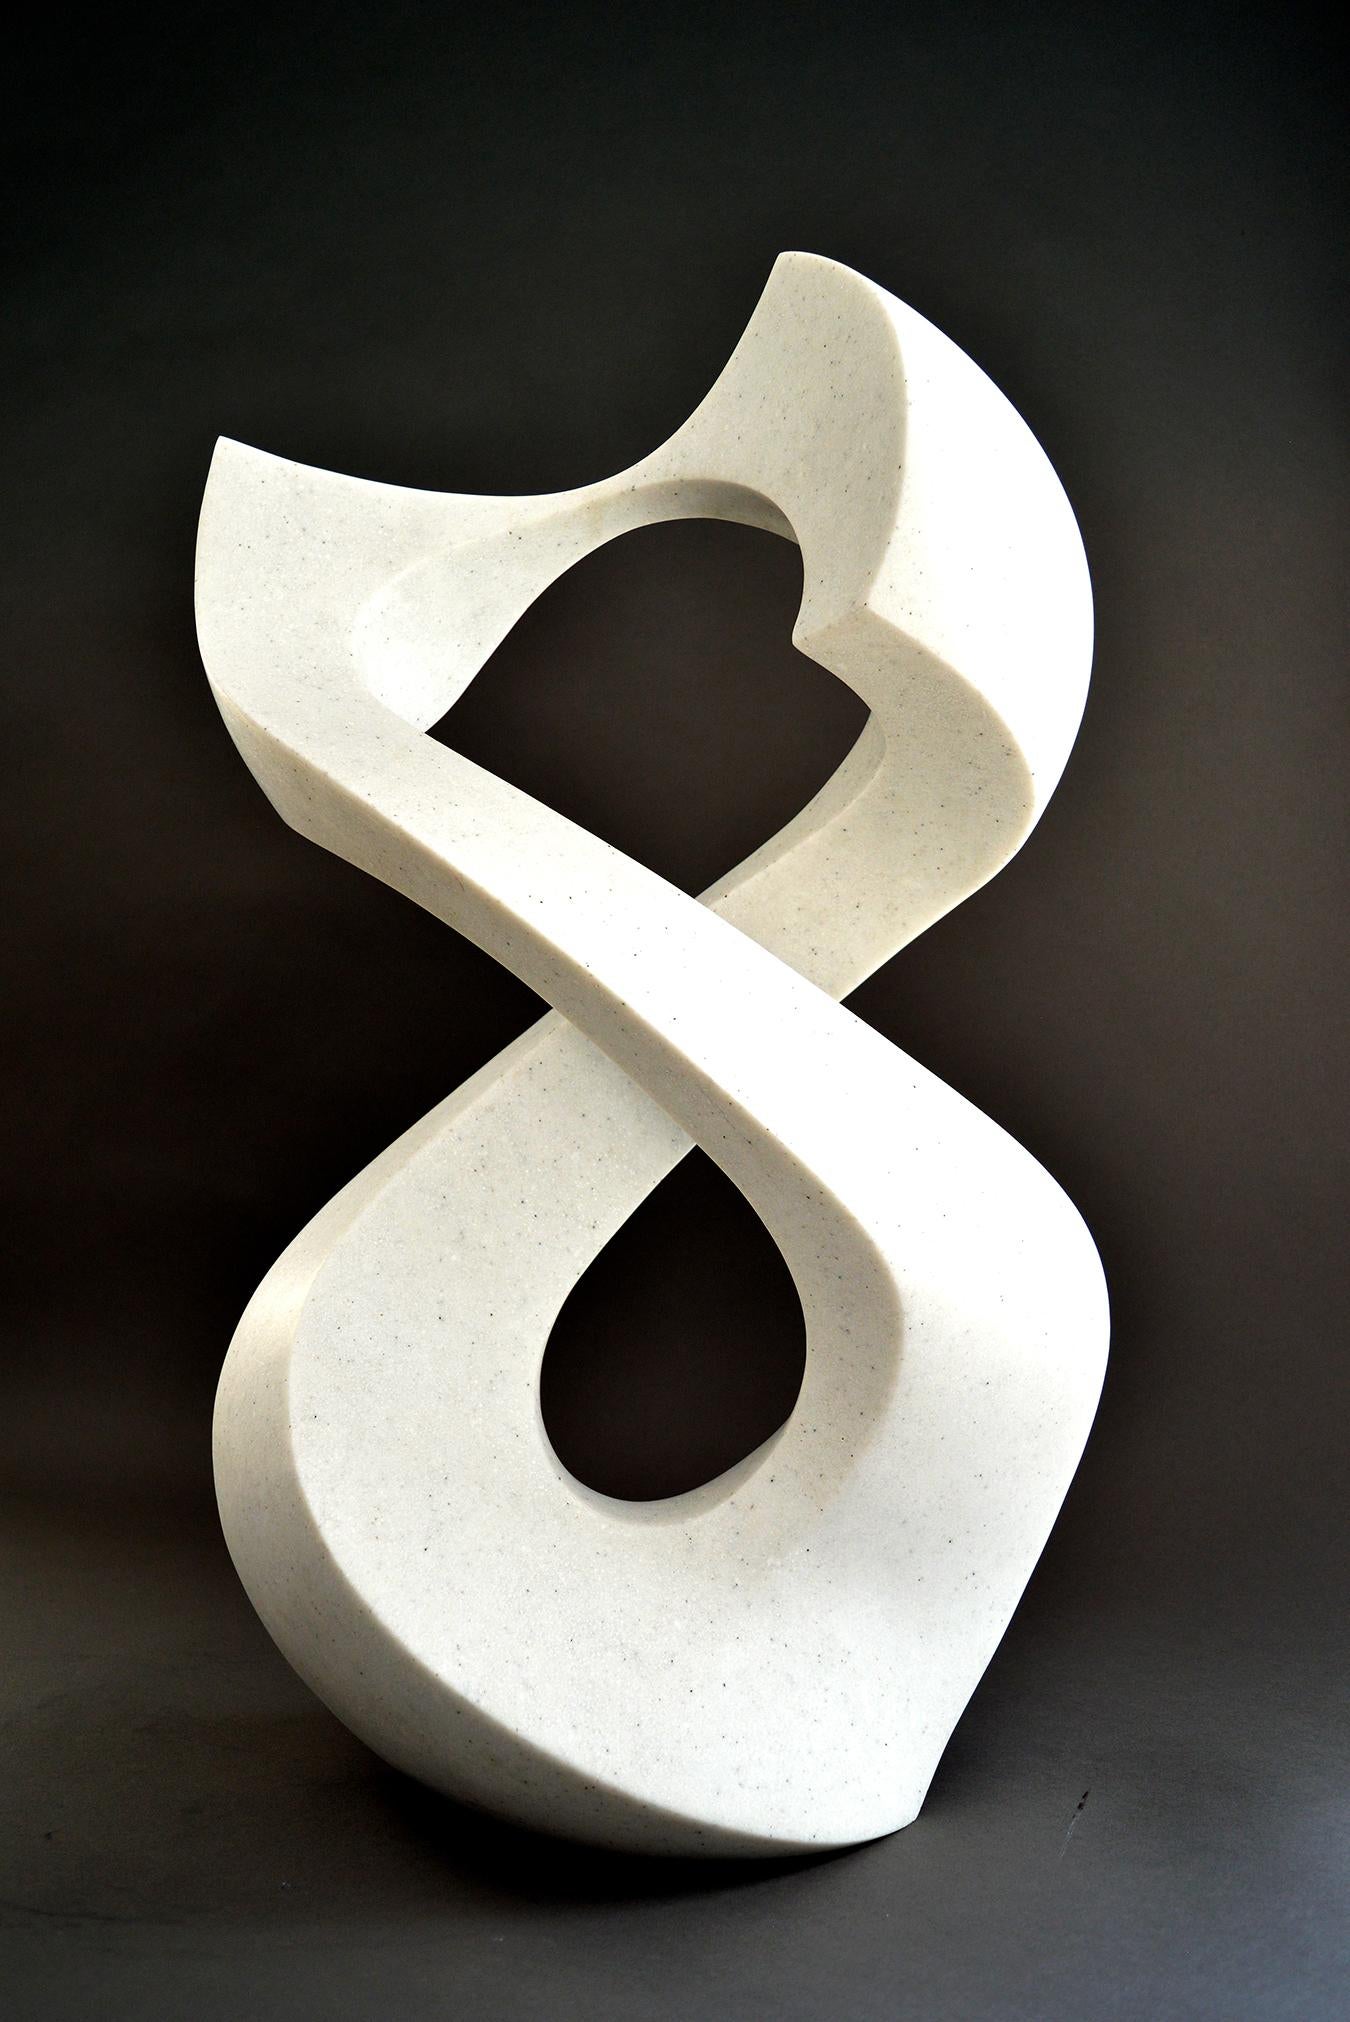 Jeremy Guy Abstract Sculpture - Halcyon White 4/50 - smooth, polished, abstract, engineered stone sculpture